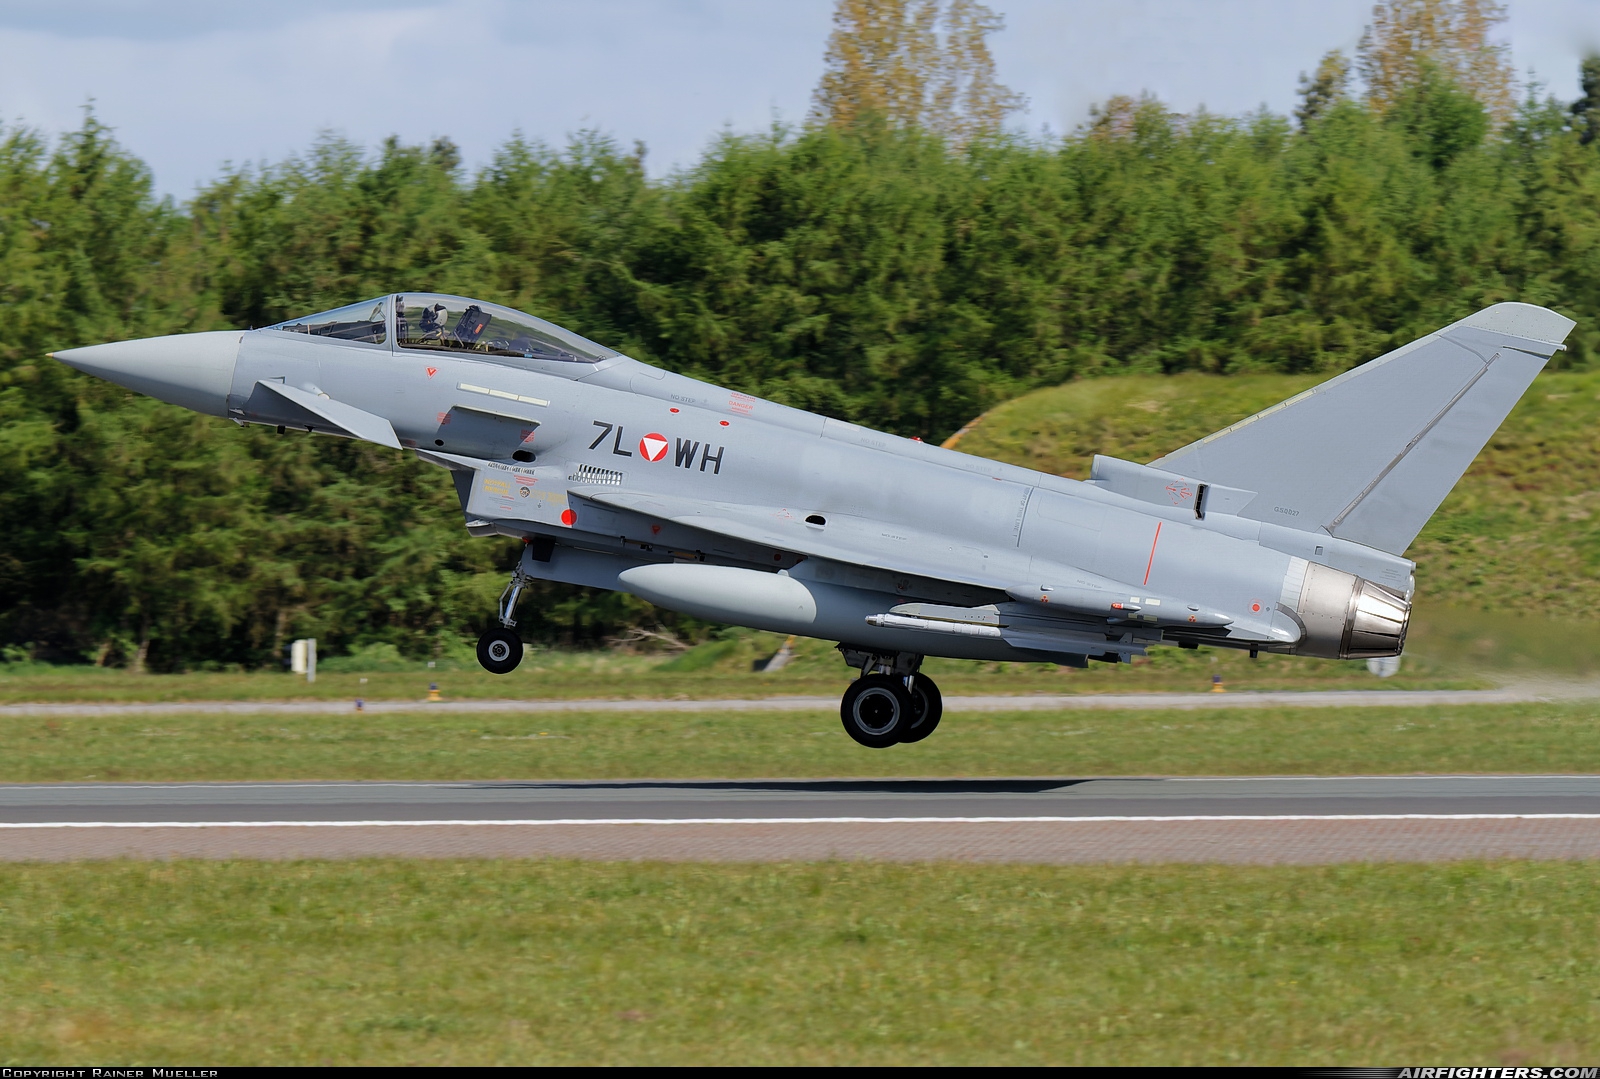 Austria - Air Force Eurofighter EF-2000 Typhoon S 7L-WH at Wittmundhafen (Wittmund) (ETNT), Germany